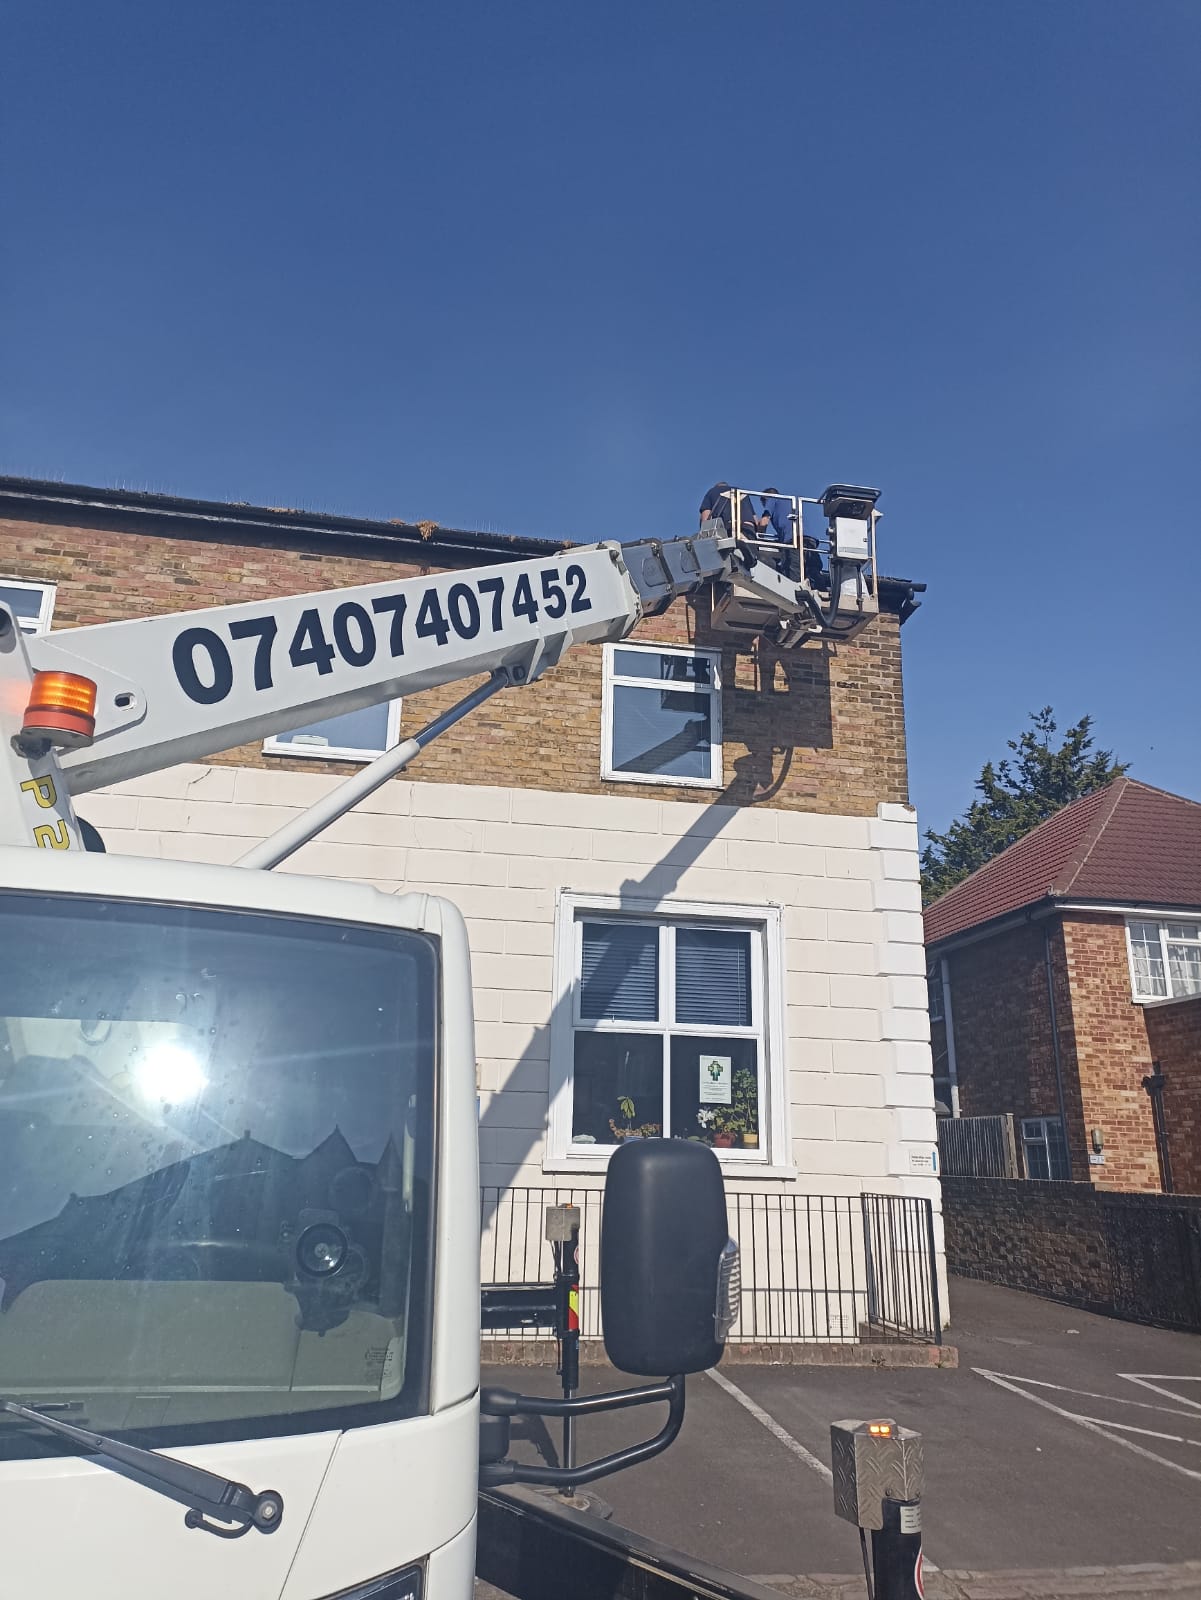 Main image for Cherry Picker Hire London